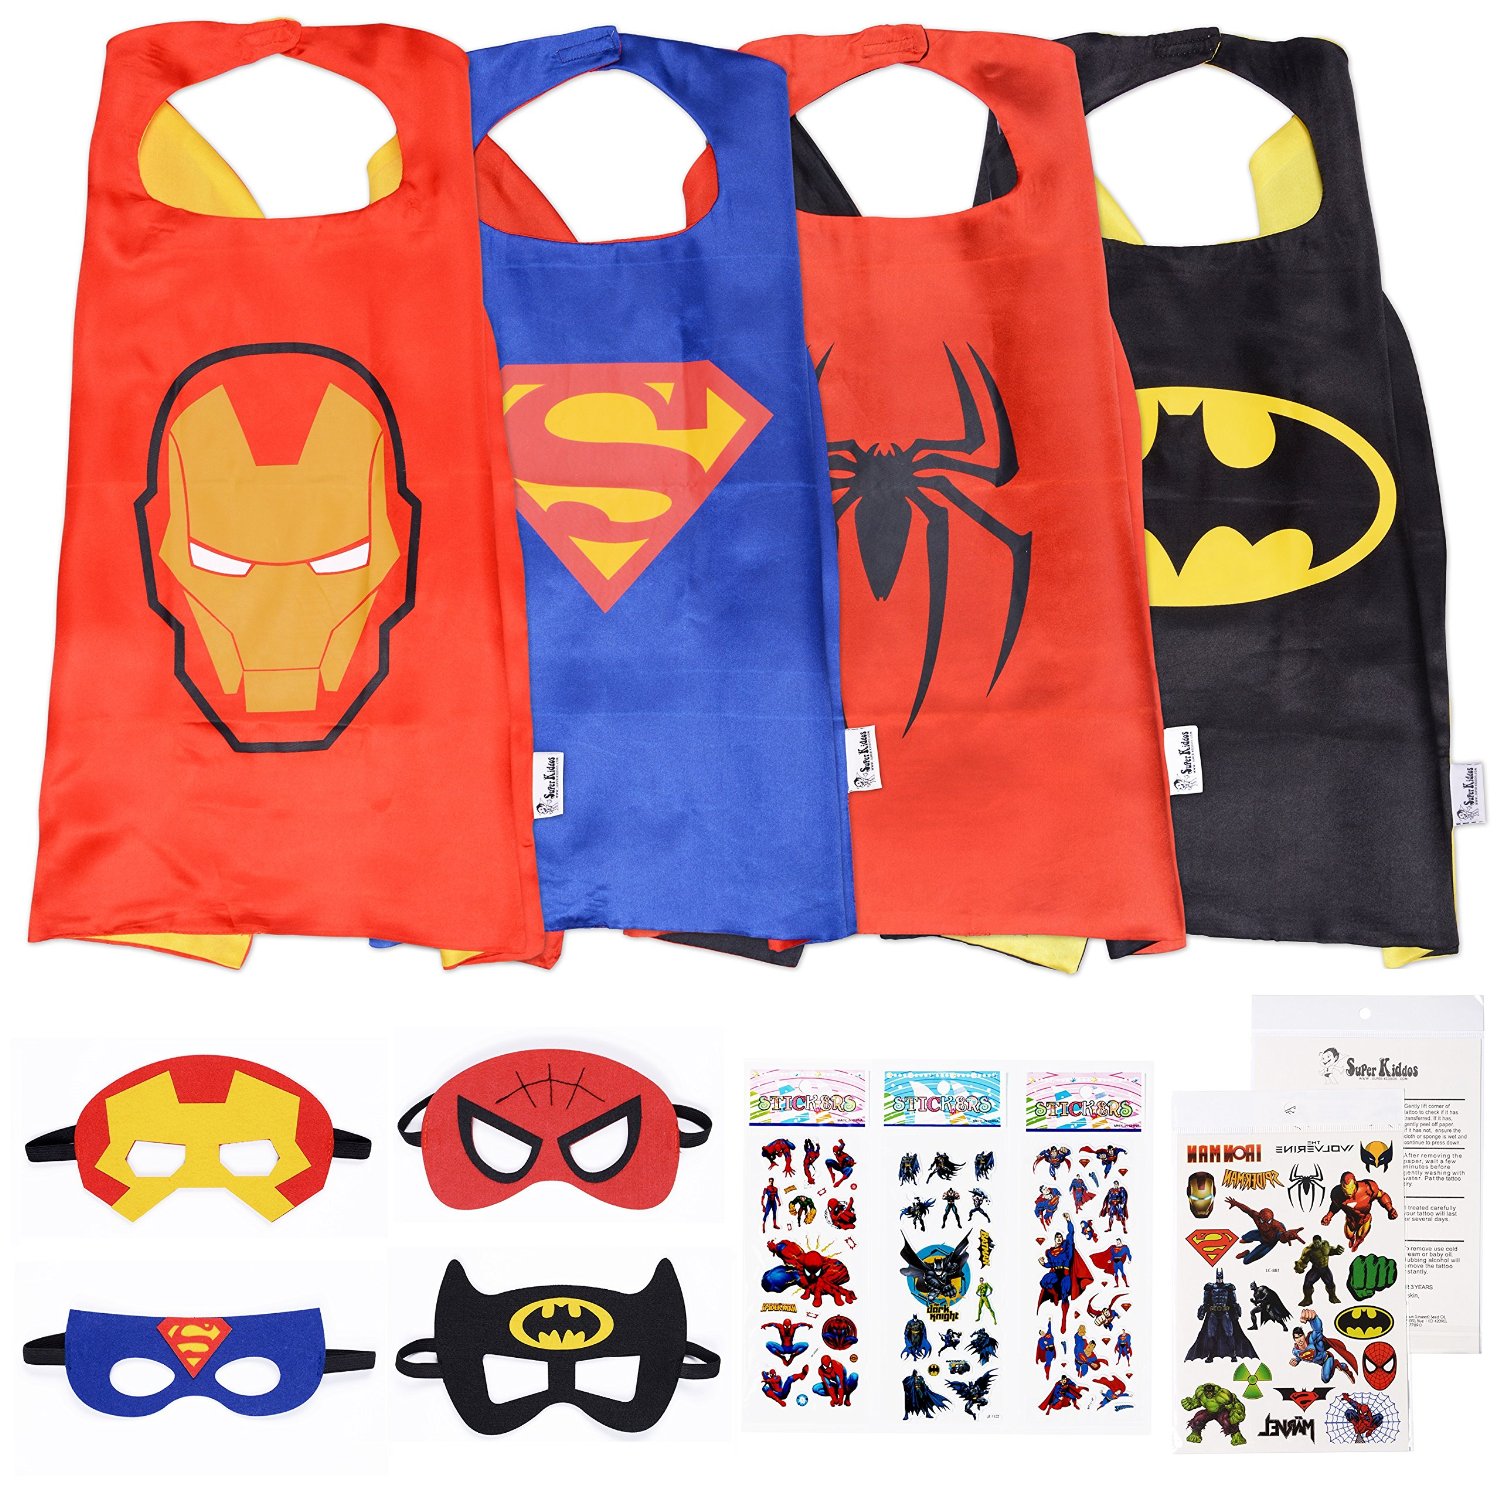 Superhero Cape and Mask Costumes For Kids (4 Sets) Just $14.99! And Includes 3 Superhero Sticker Sheets & 1 Tattoos Sheet!